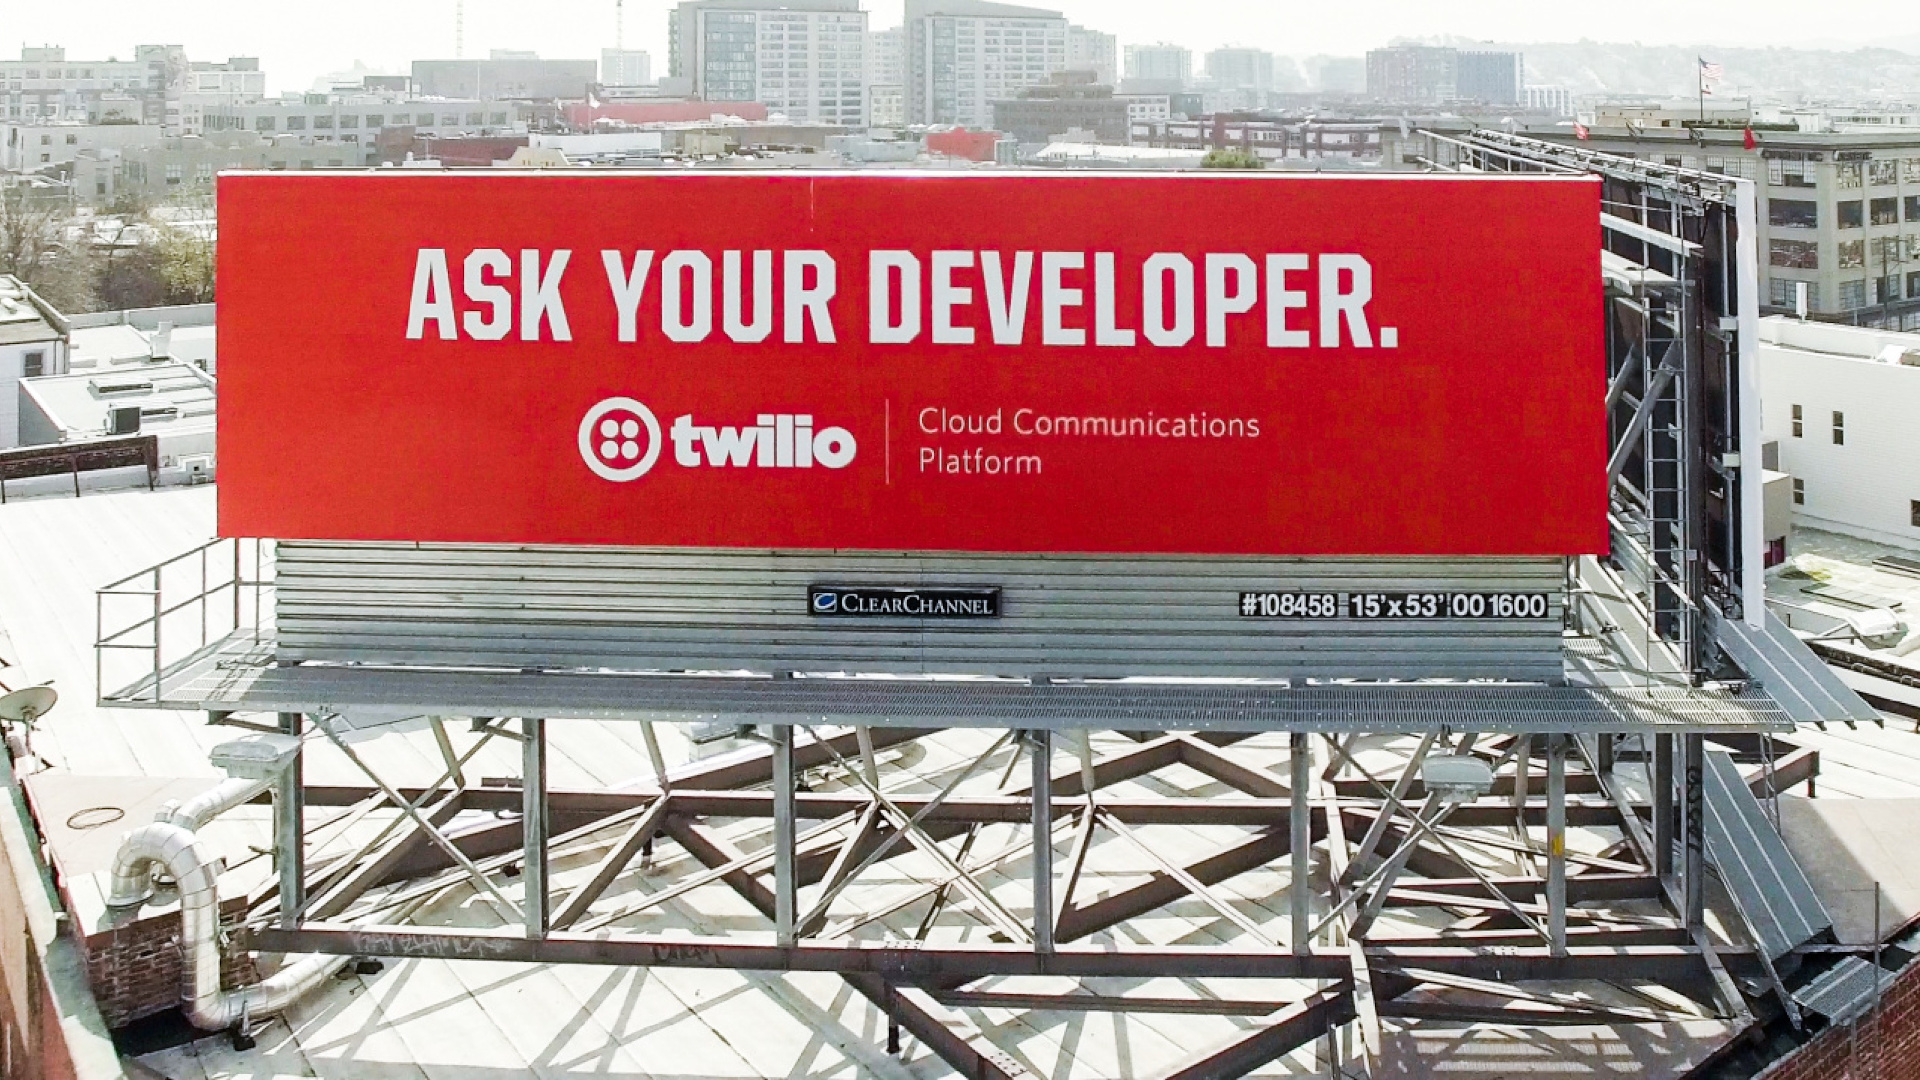 Twilio targets developers, even though the buyer isn't a developer. This campaign was so effective, it turned into an entire book.